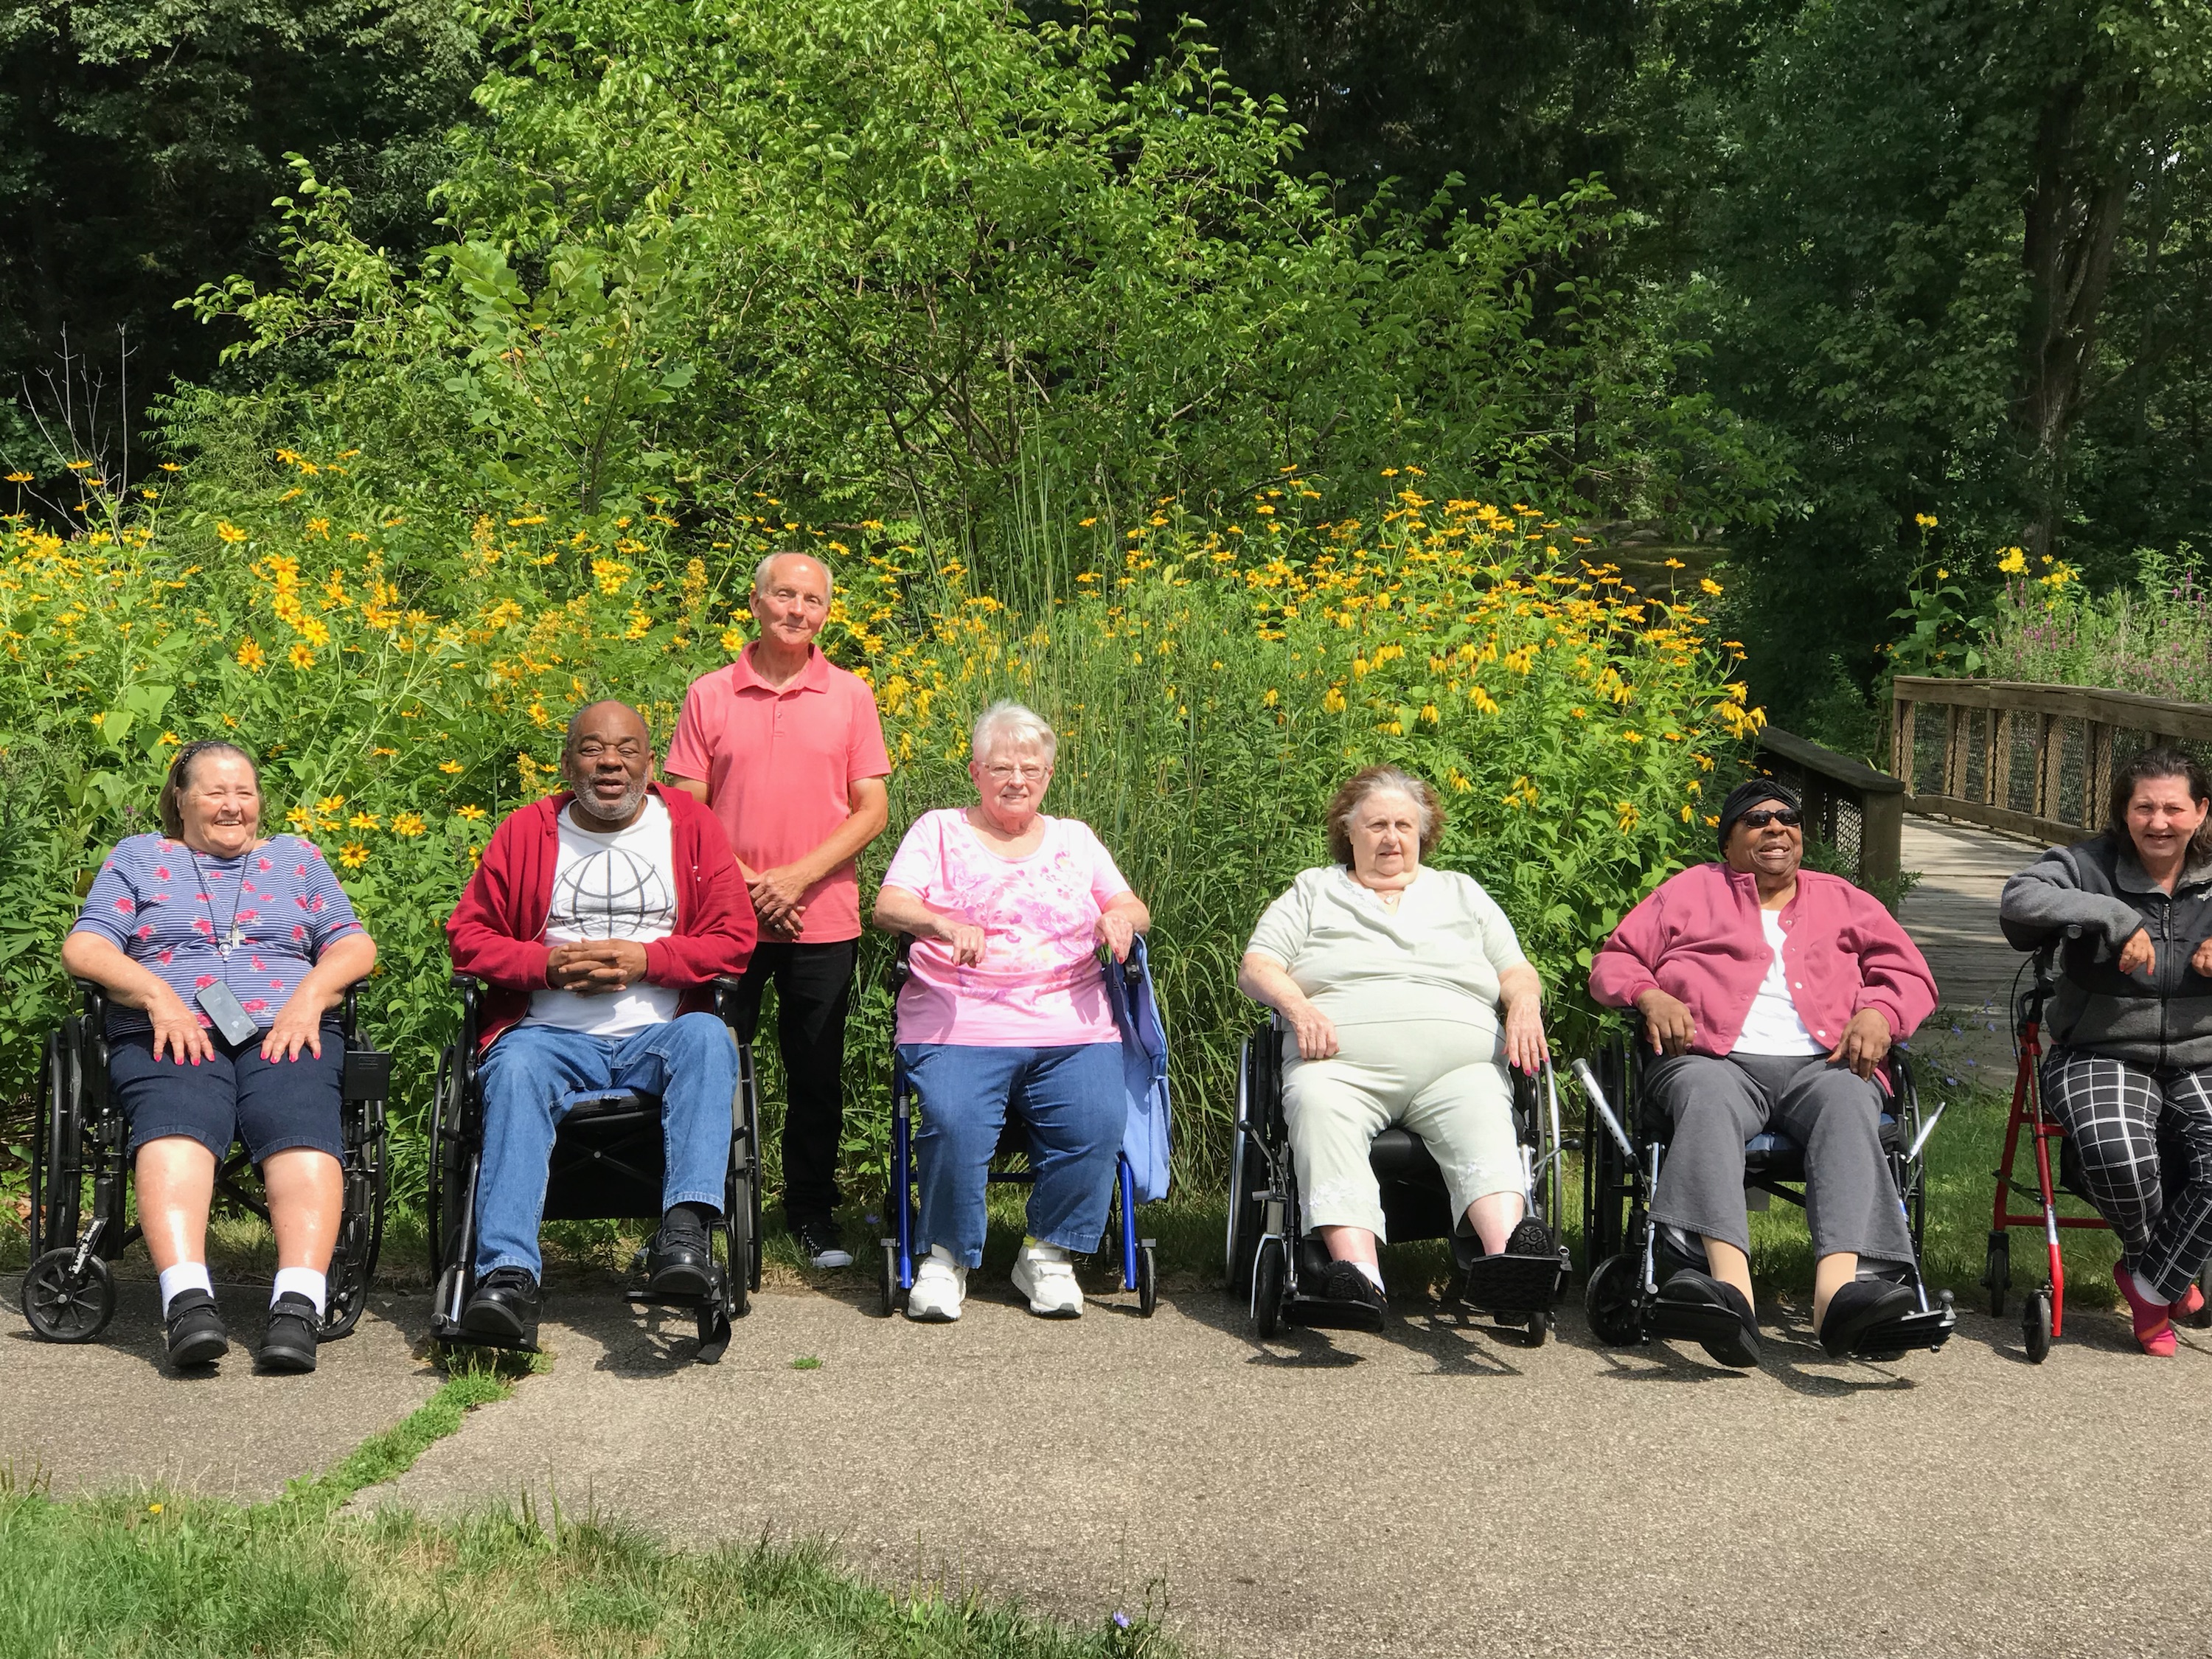 residents group picture at the park